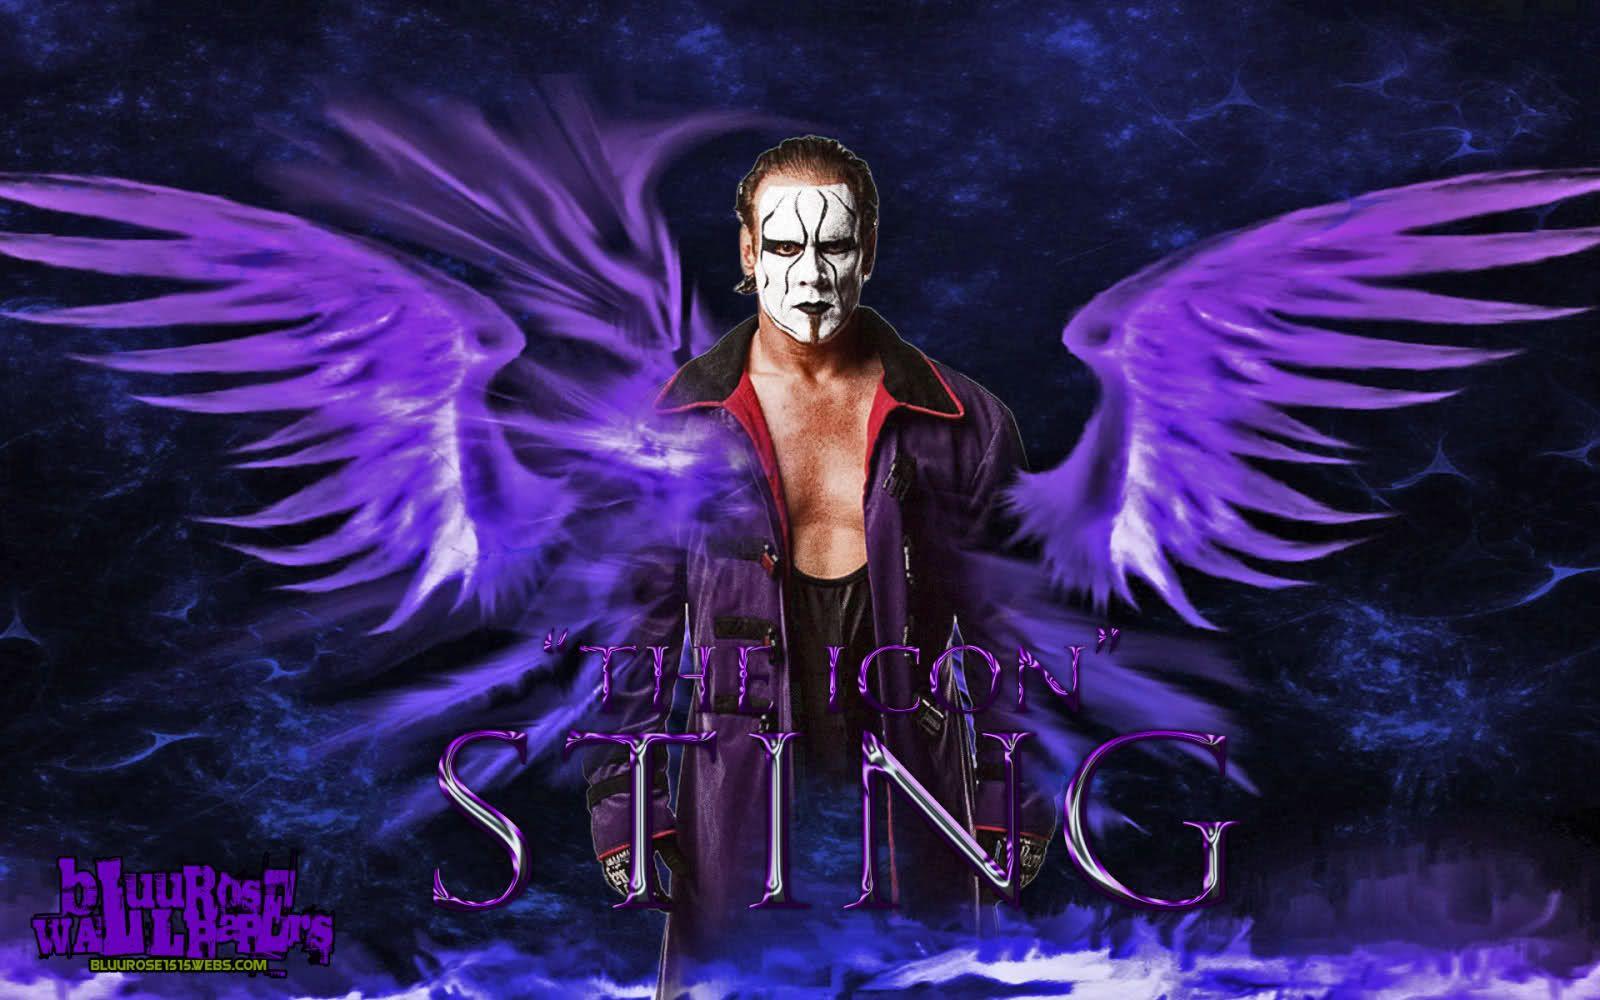 WWE WALLPAPERS: Sting. sting the wrestler. wrestler sting. wwe. Wwe wallpaper, Sting wcw, Wwf superstars